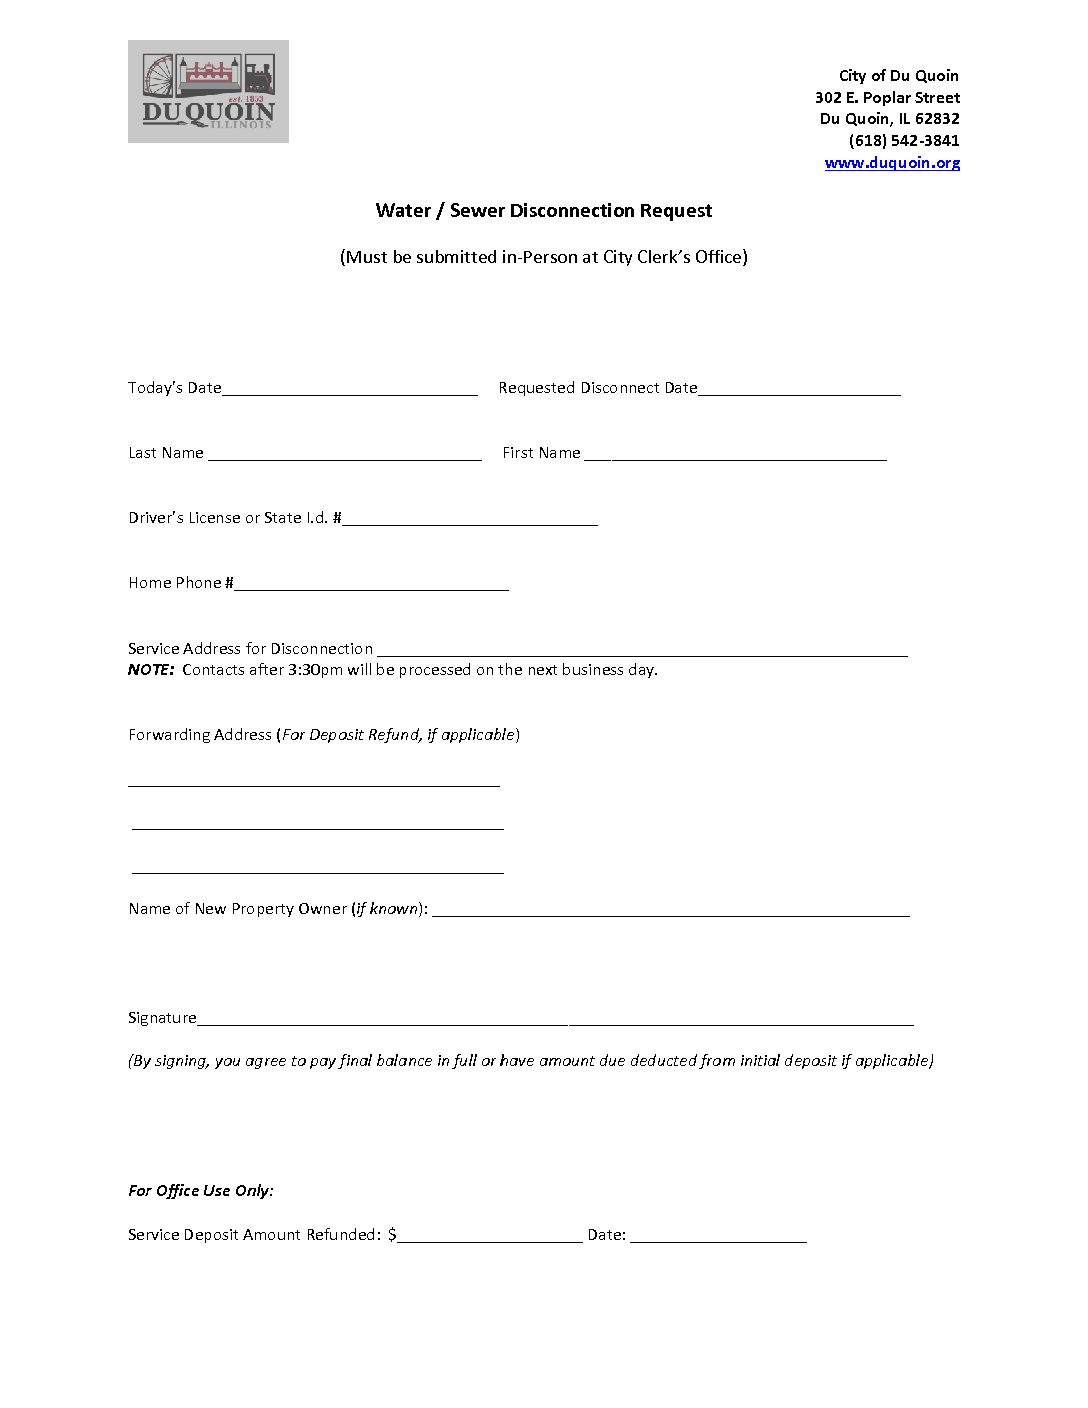 disconnection-request-water-sewer-service-pdf-jpg